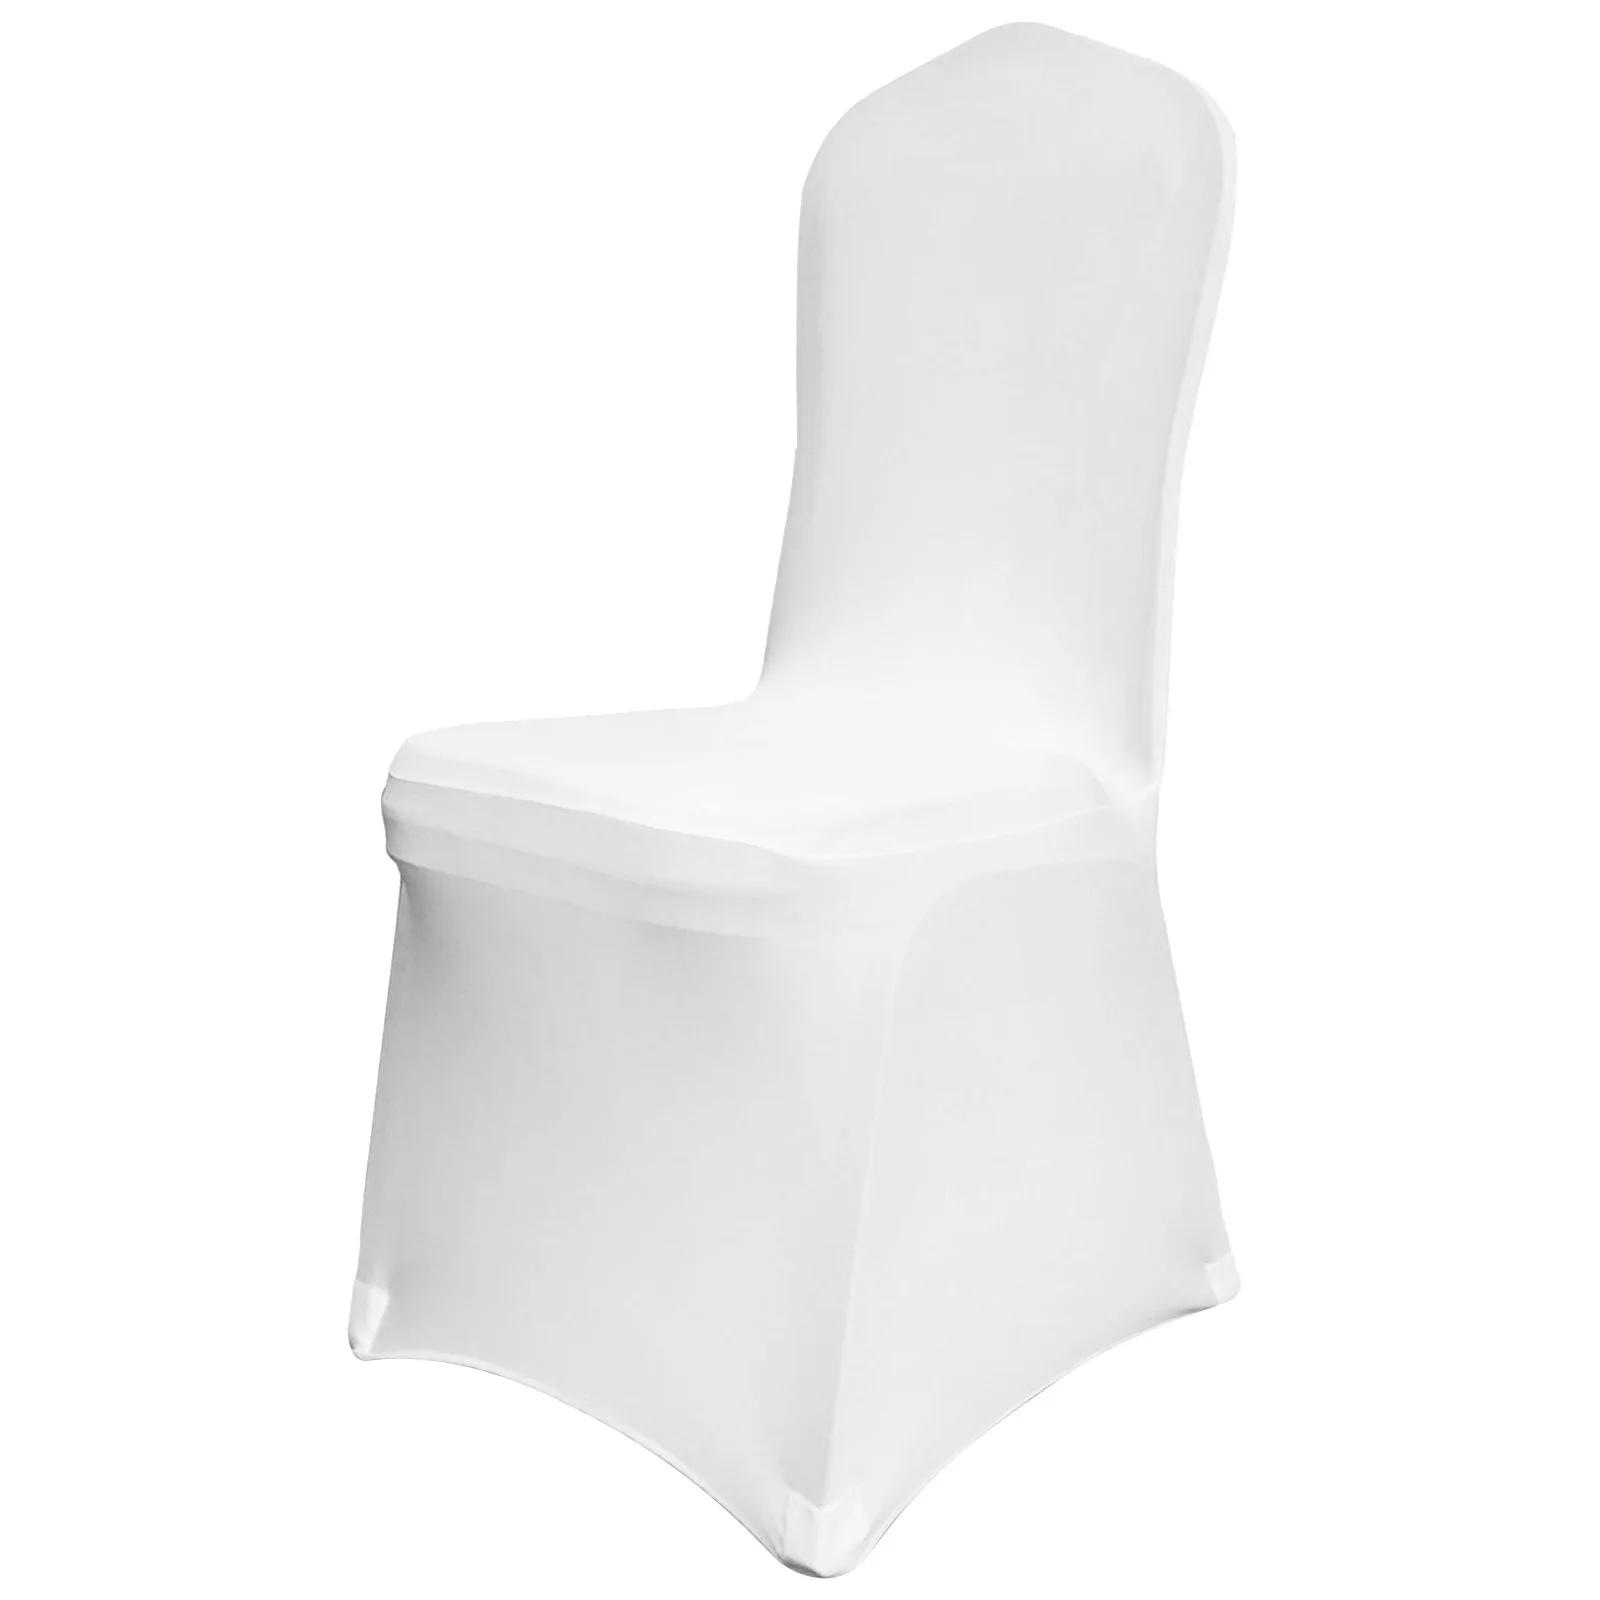 VEVOR 50 Pcs Wedding Chair Covers Spandex Stretch Slipcover for Restaurant Banquet Hotel Dining Party Universal Chair Cover